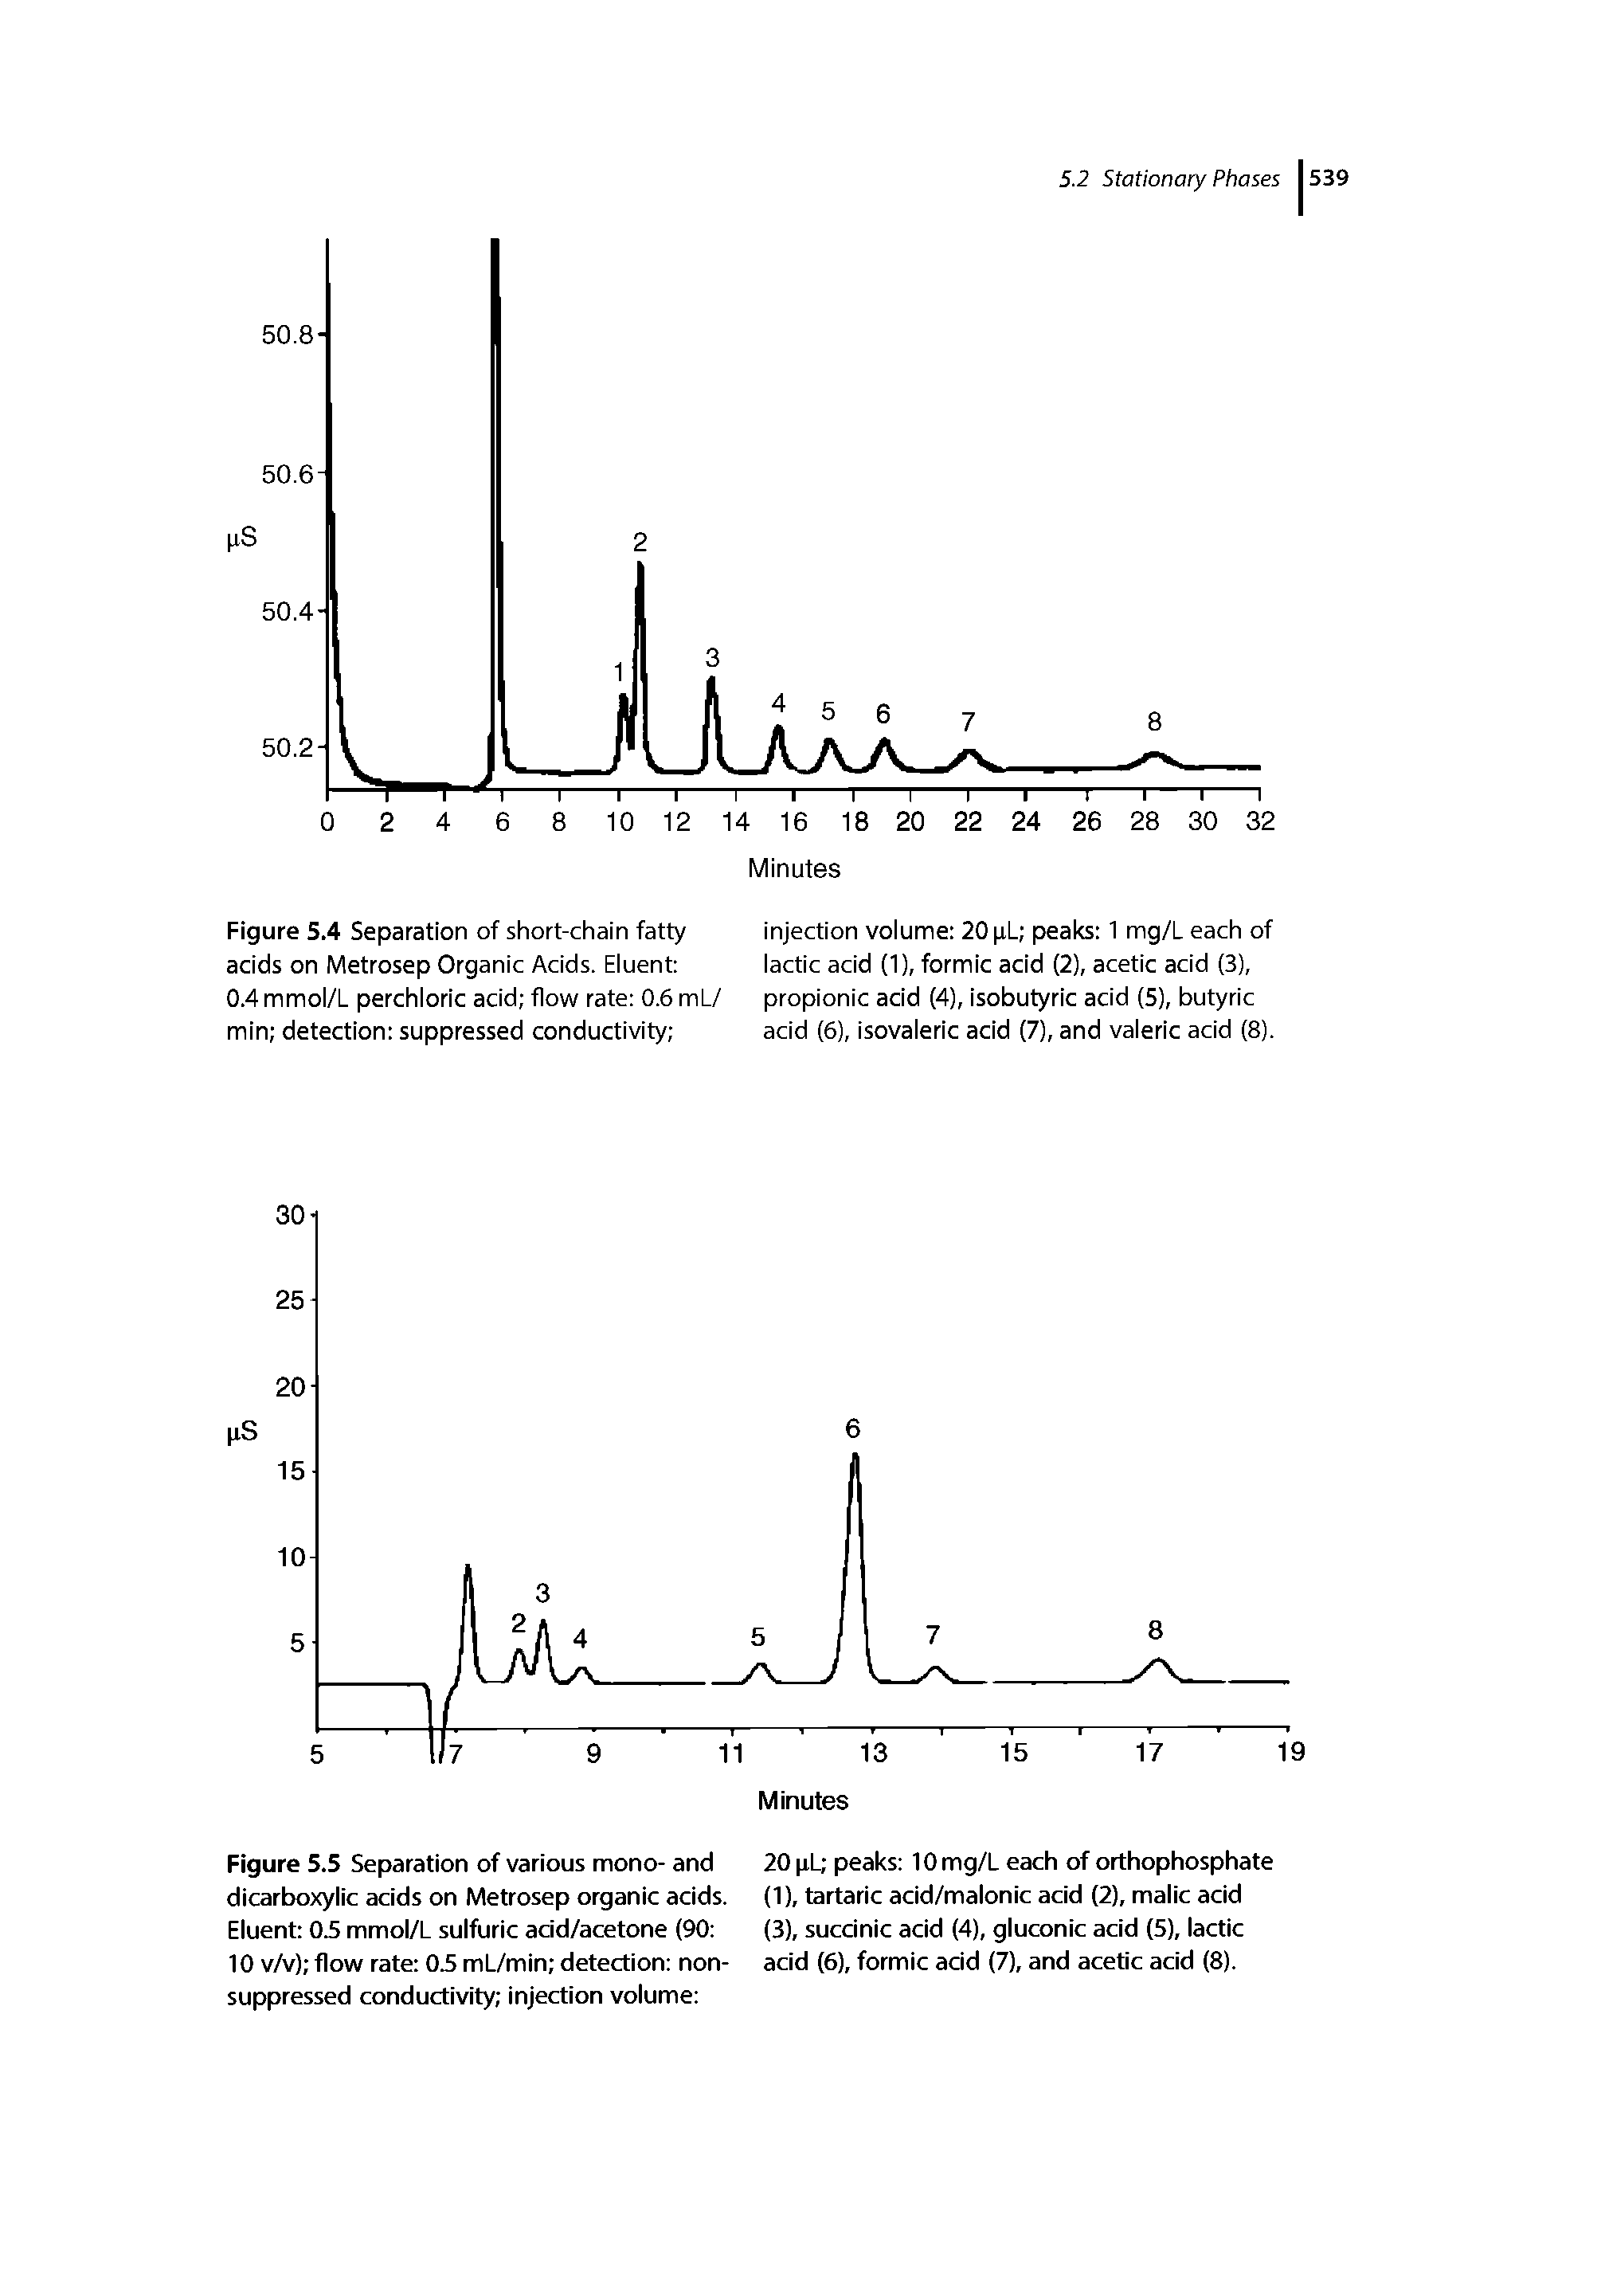 Figure 5.5 Separation of various mono- and dicarboxylic acids on Metrosep organic acids. Eluent 05 mmol/L sulfuric acid/acetone (90 10 v/v) flow rate 05 mL/min detection non-suppressed conductivity injection volume ...